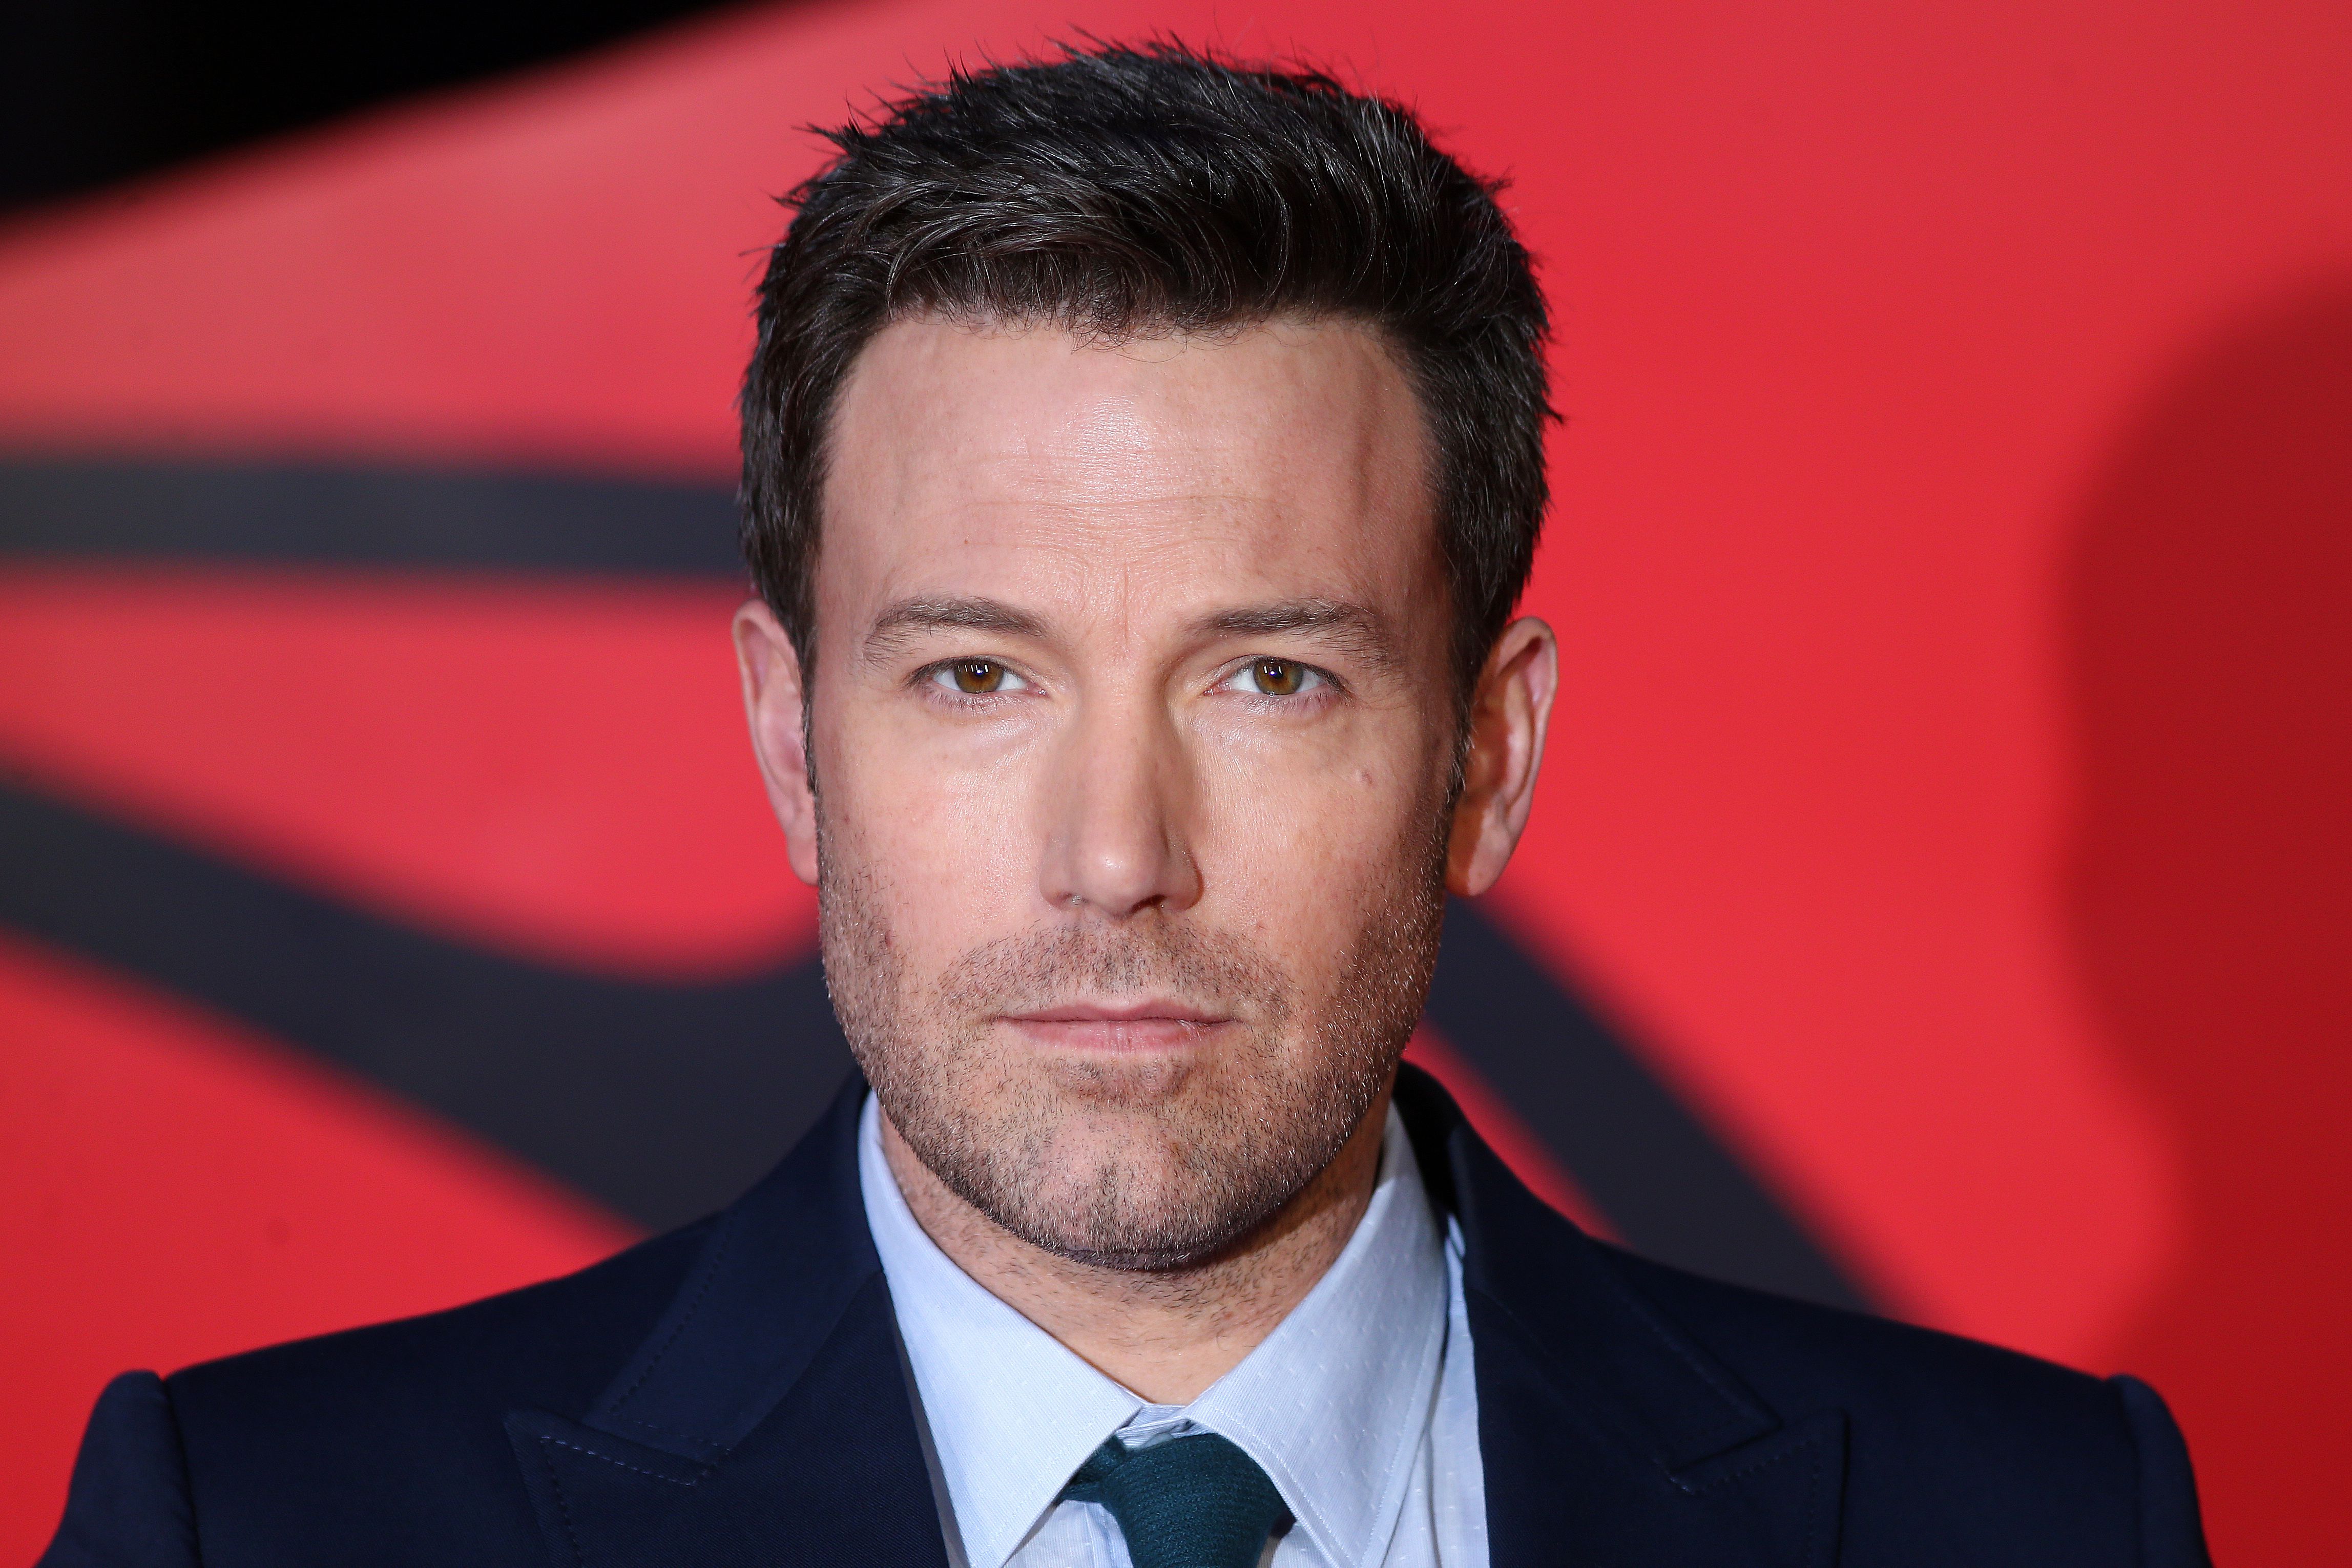 Ben Affleck Net Worth and How He Makes His Money